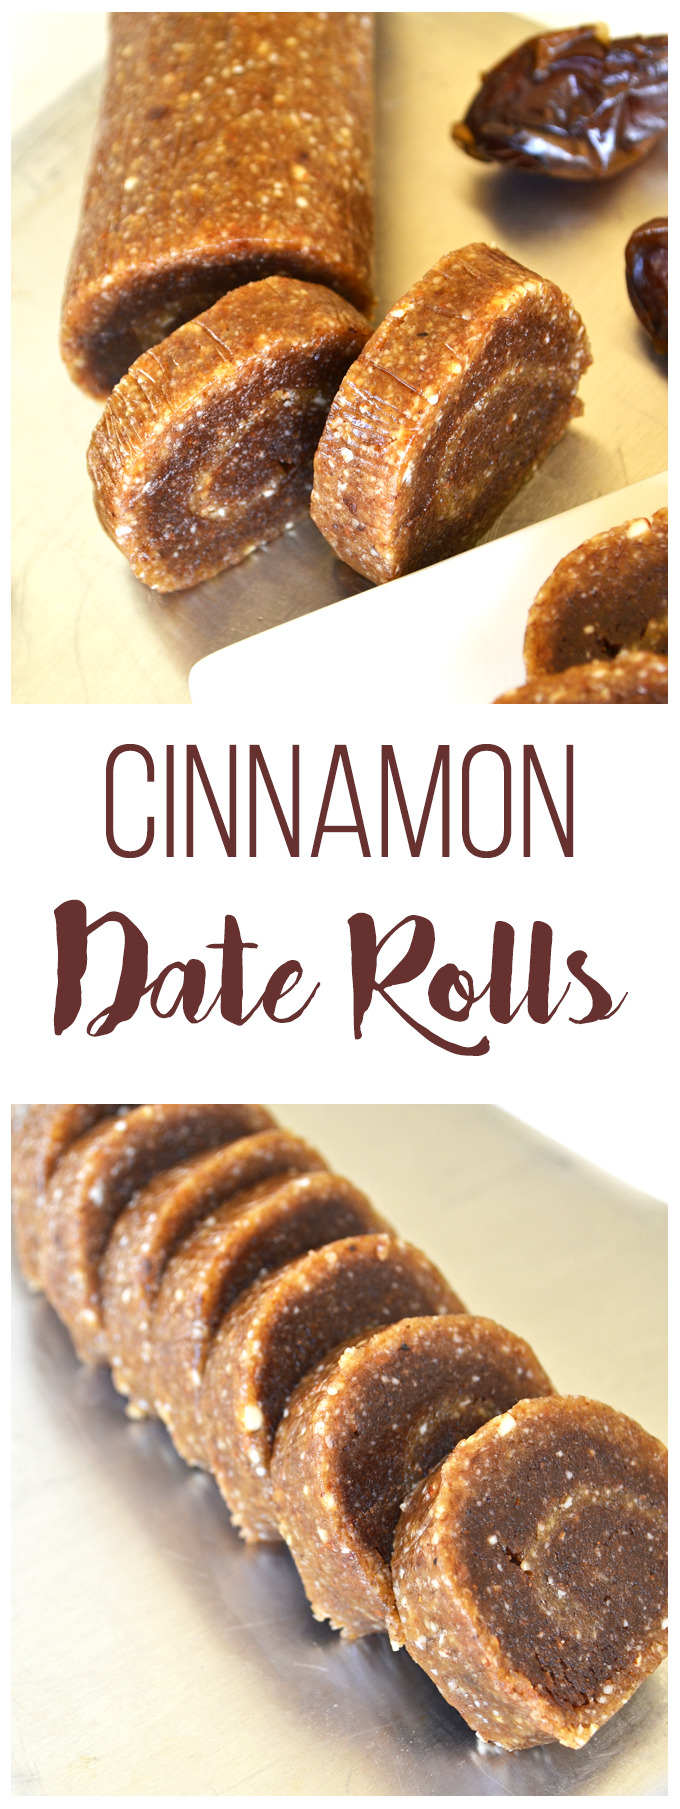 Need a sweet cinnamony treat? These Cinnamon Date Rolls have protein and no refined sugars! Just a few ingredients make the the perfect clean treat!